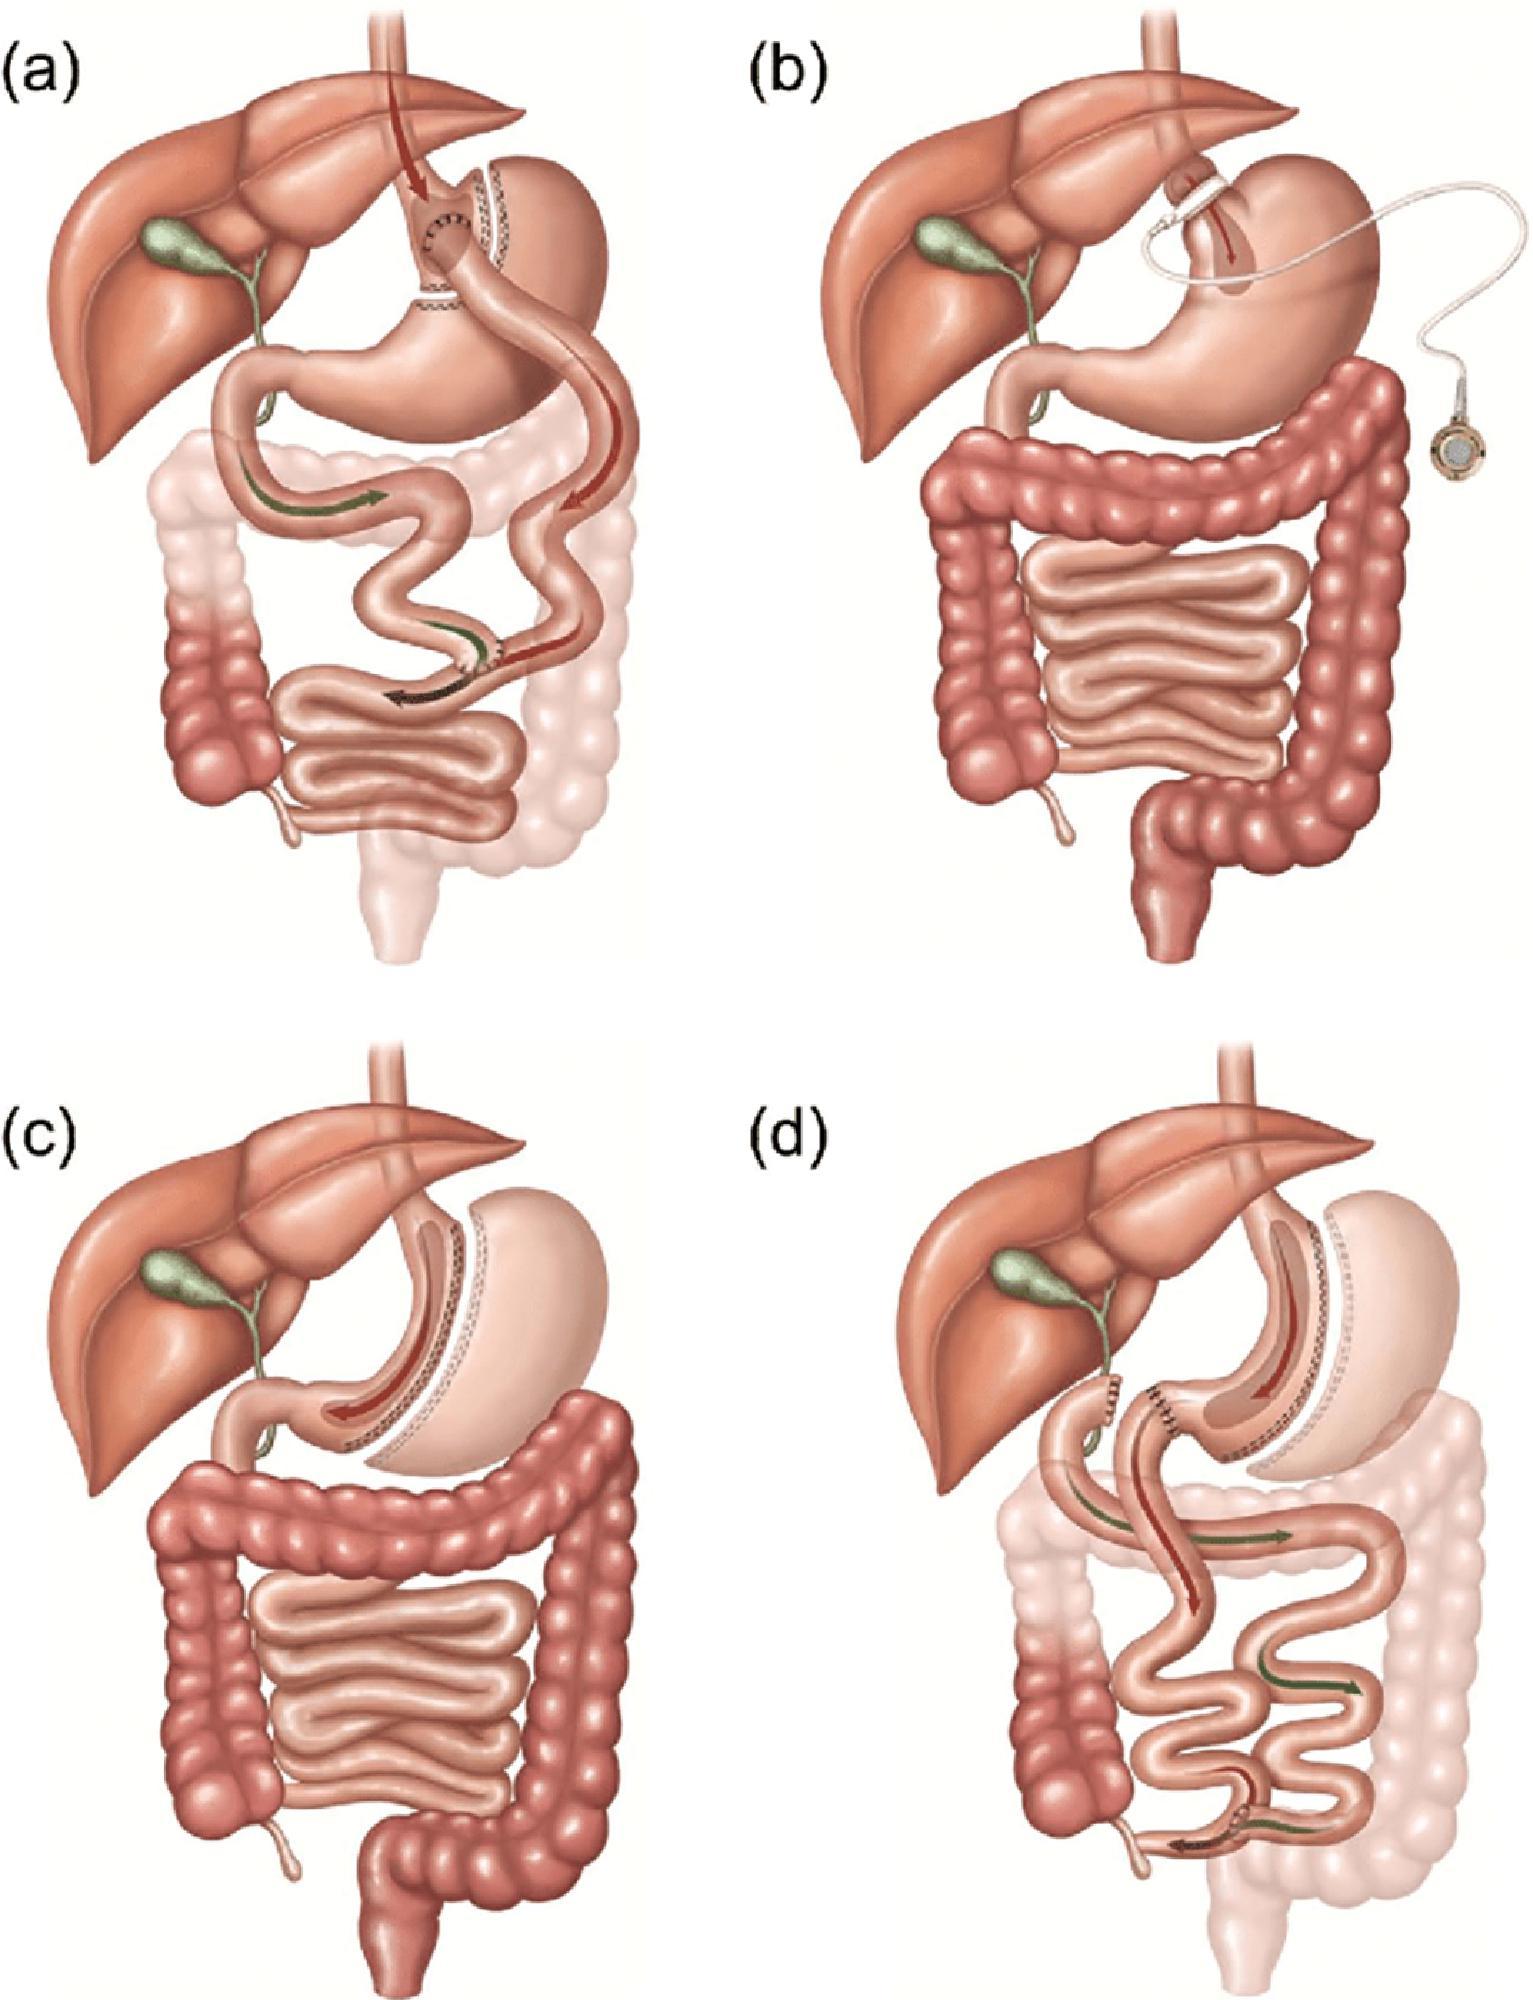 Fig. 11.1, Major types of bariatric surgery. (A) Roux-en-Y gastric bypass. (B) Adjustable gastric band. (C) Sleeve gastrectomy. (D) Biliopancreatic diversion. (Reprinted with permission from Neff KJ, Olbers T, le Roux CW. Bariatric surgery: the challenges with candidate selection, individualizing treatment and clinical outcomes. BMC Med 2013;11:8.)